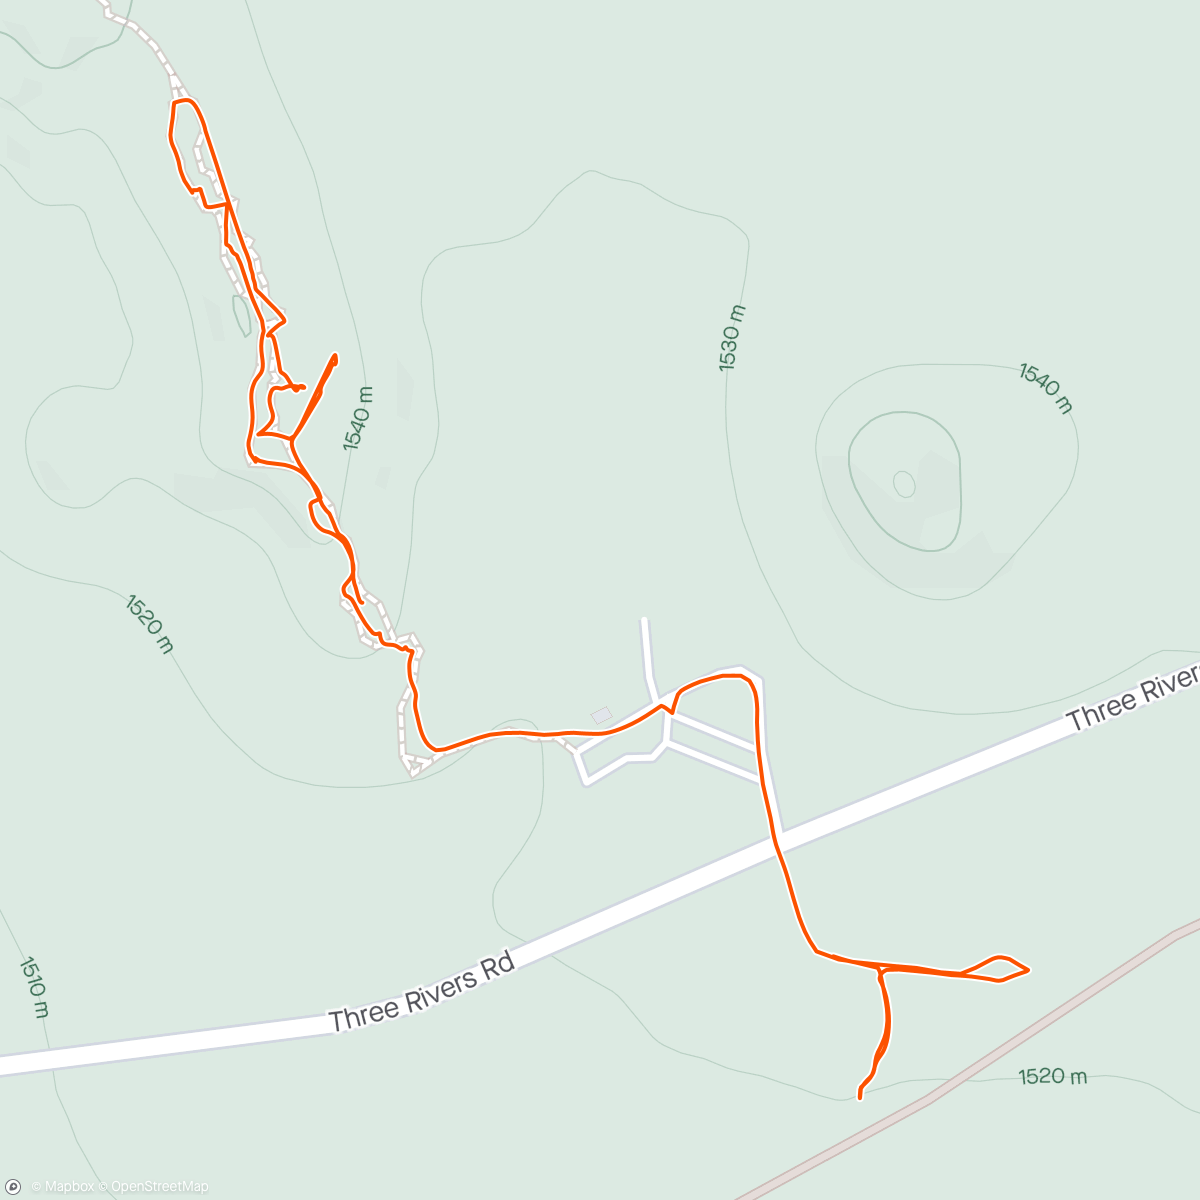 Map of the activity, Hike Three rivers Petroglyph Site